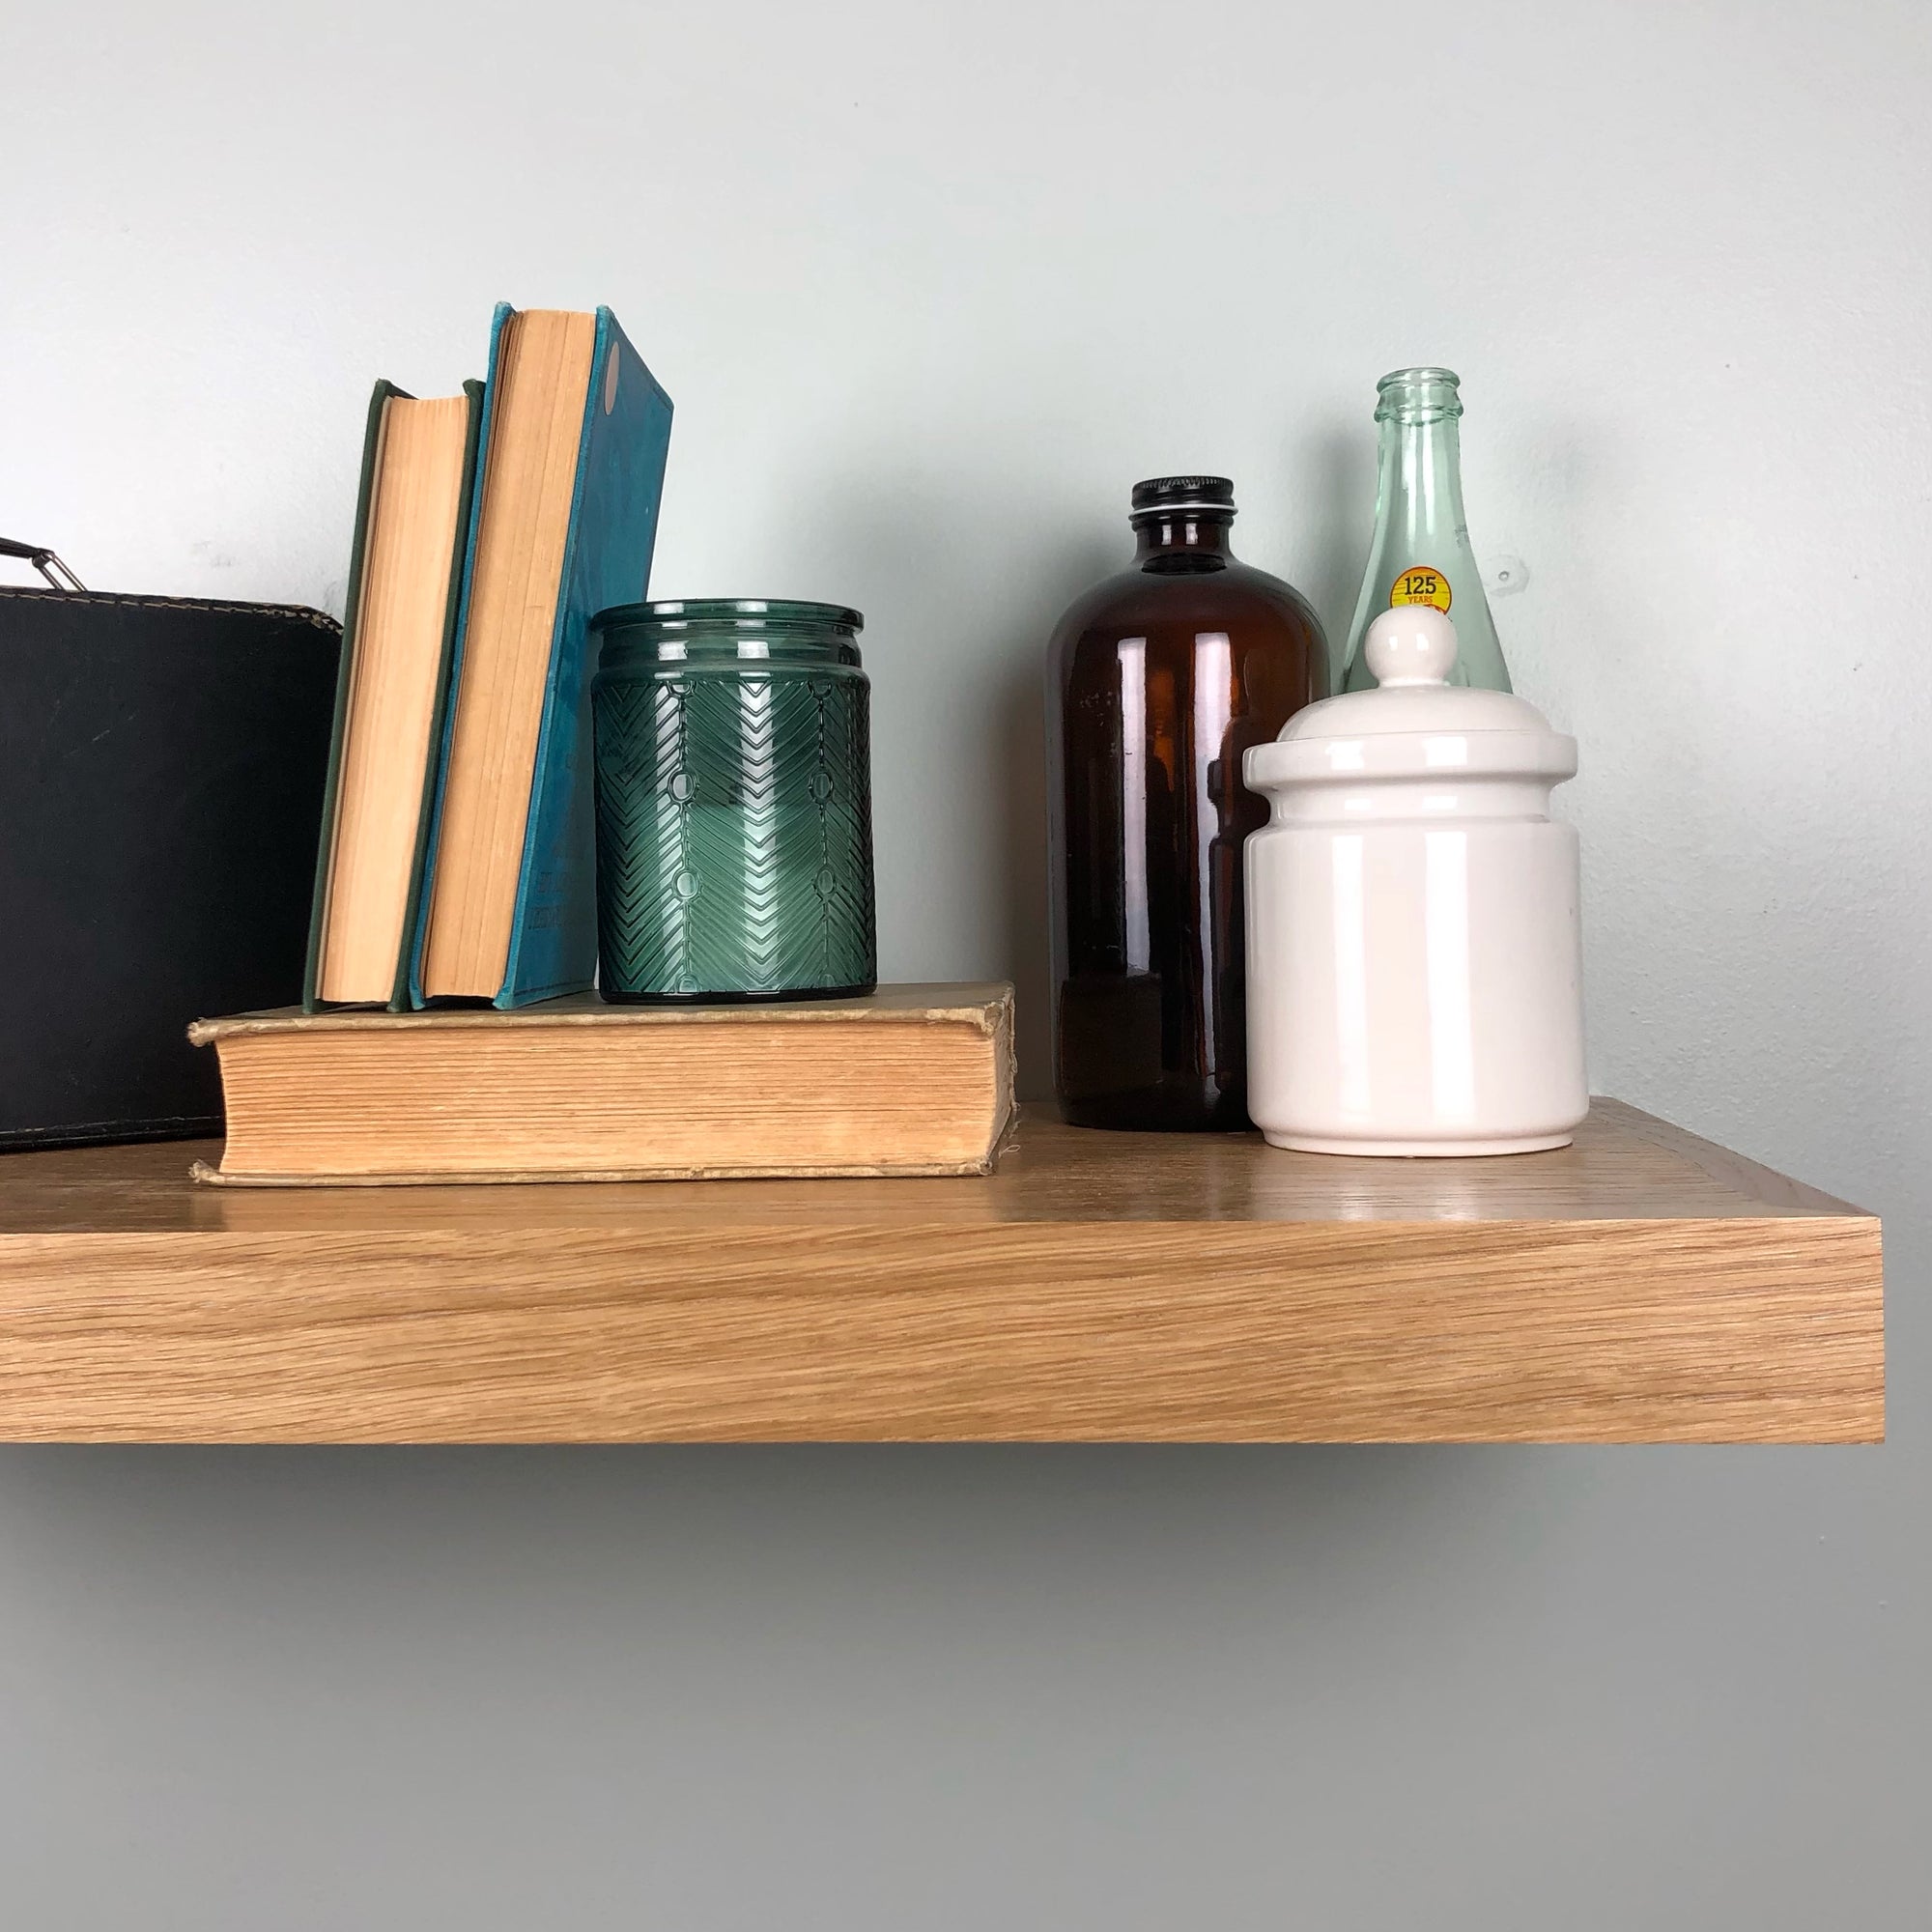 24-in Oak Floating Shelf -express shipping-color options